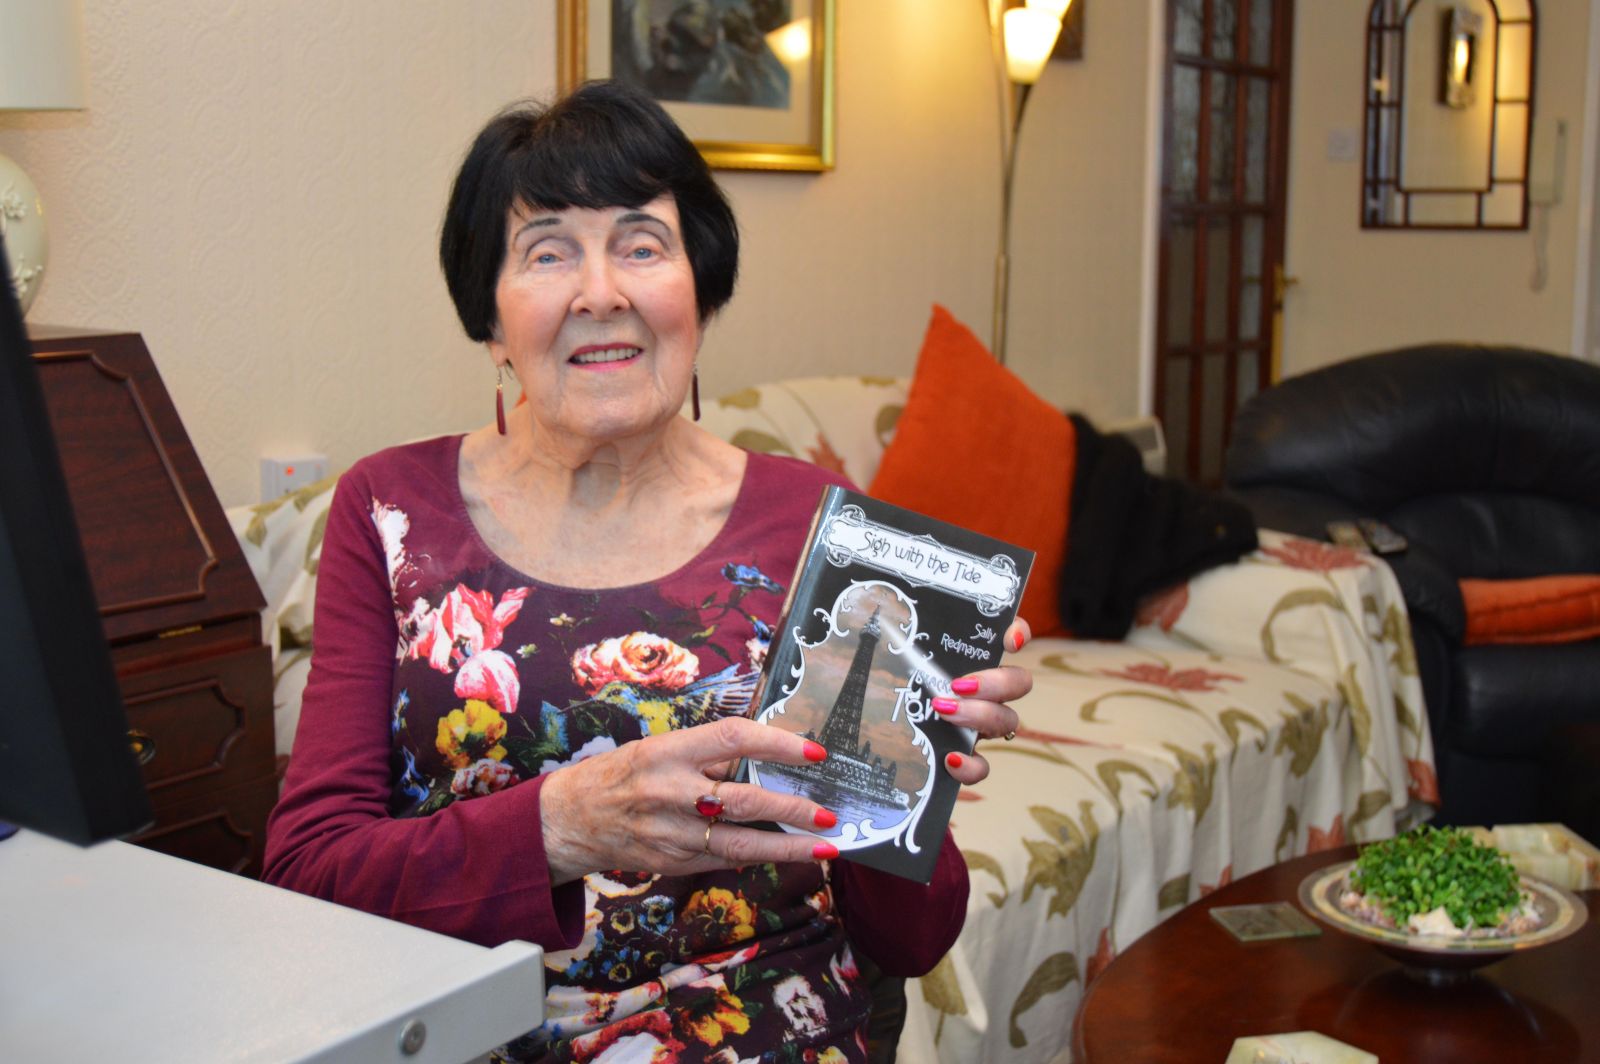 Freda pictured with a copy of her published novel, Sigh With The Tide.